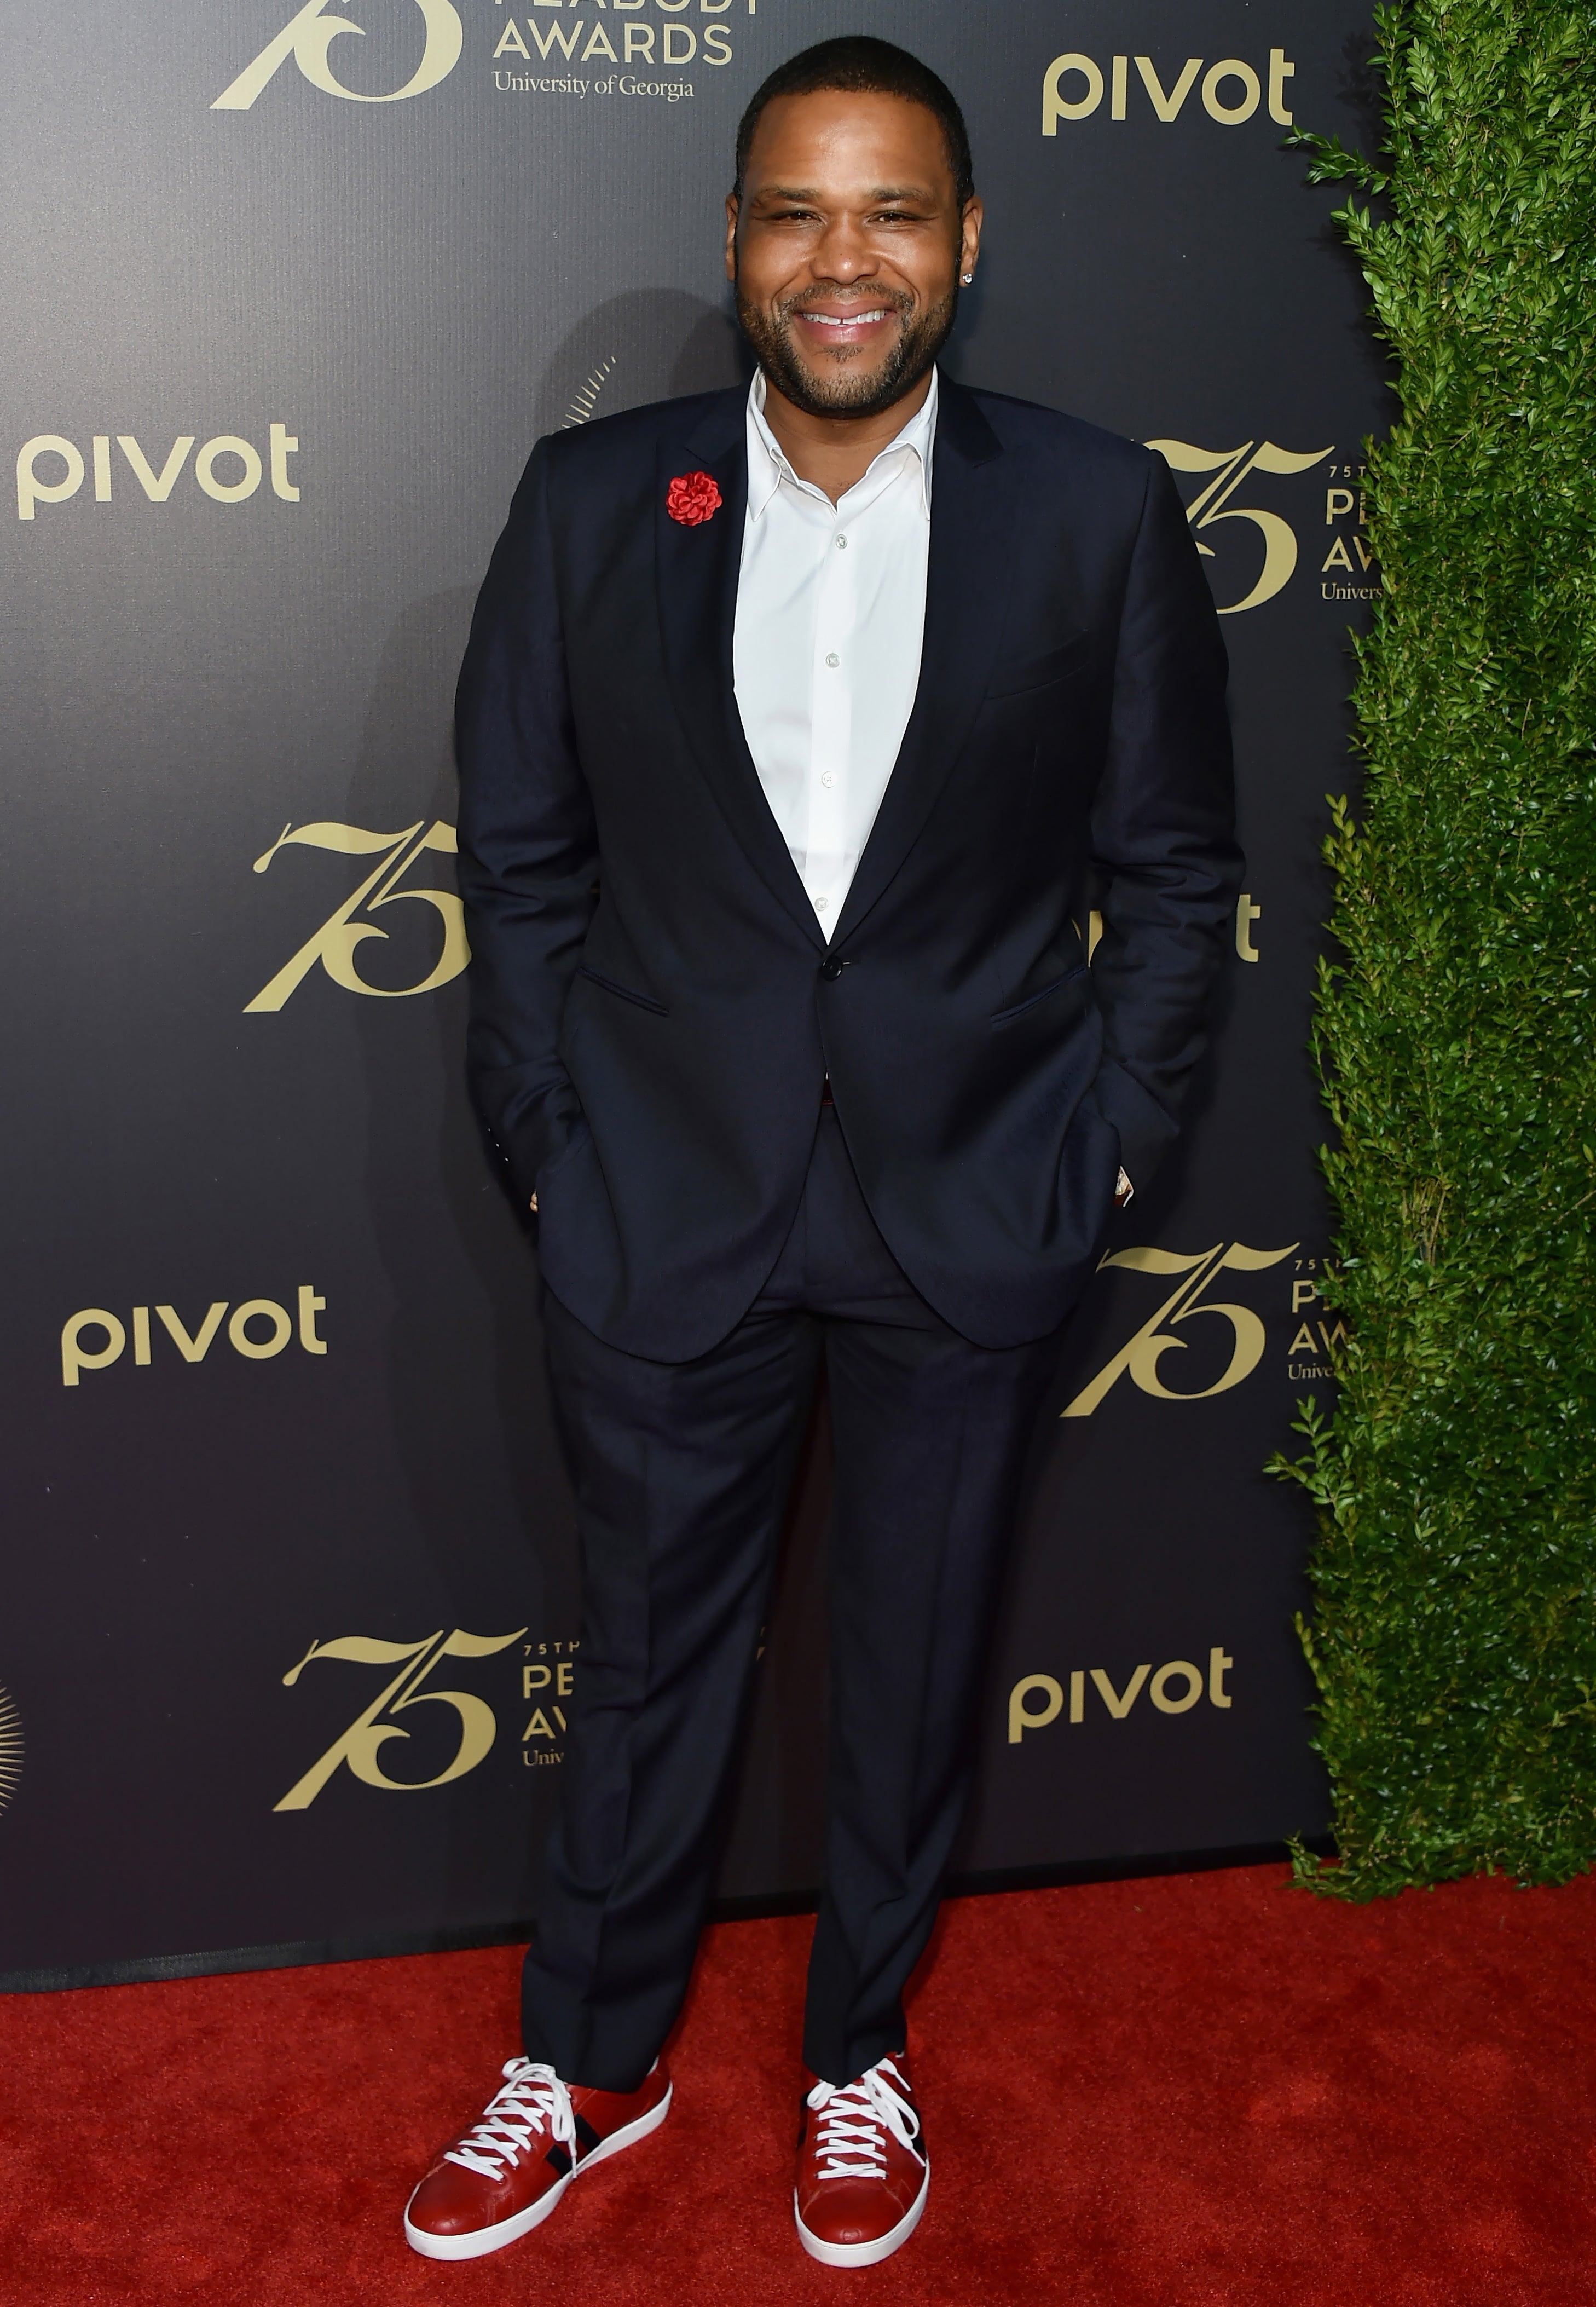 Anthony Anderson on Diversity in Hollywood: 'We Want To Be Included'
